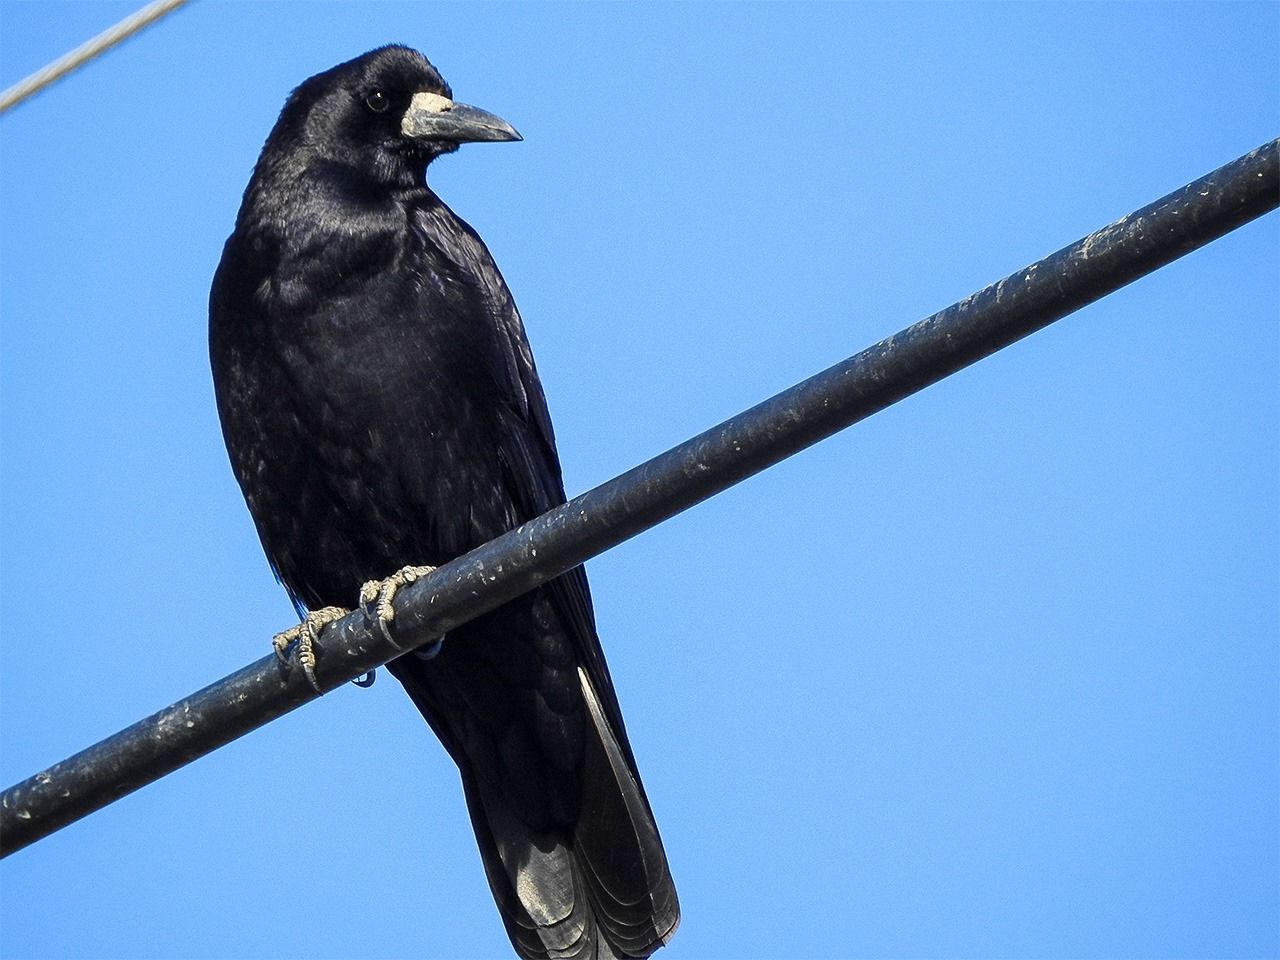 A miyama garasu. These rooks are distinctive for their light grey beaks with a whitish base. They migrate to Japan in the winter.